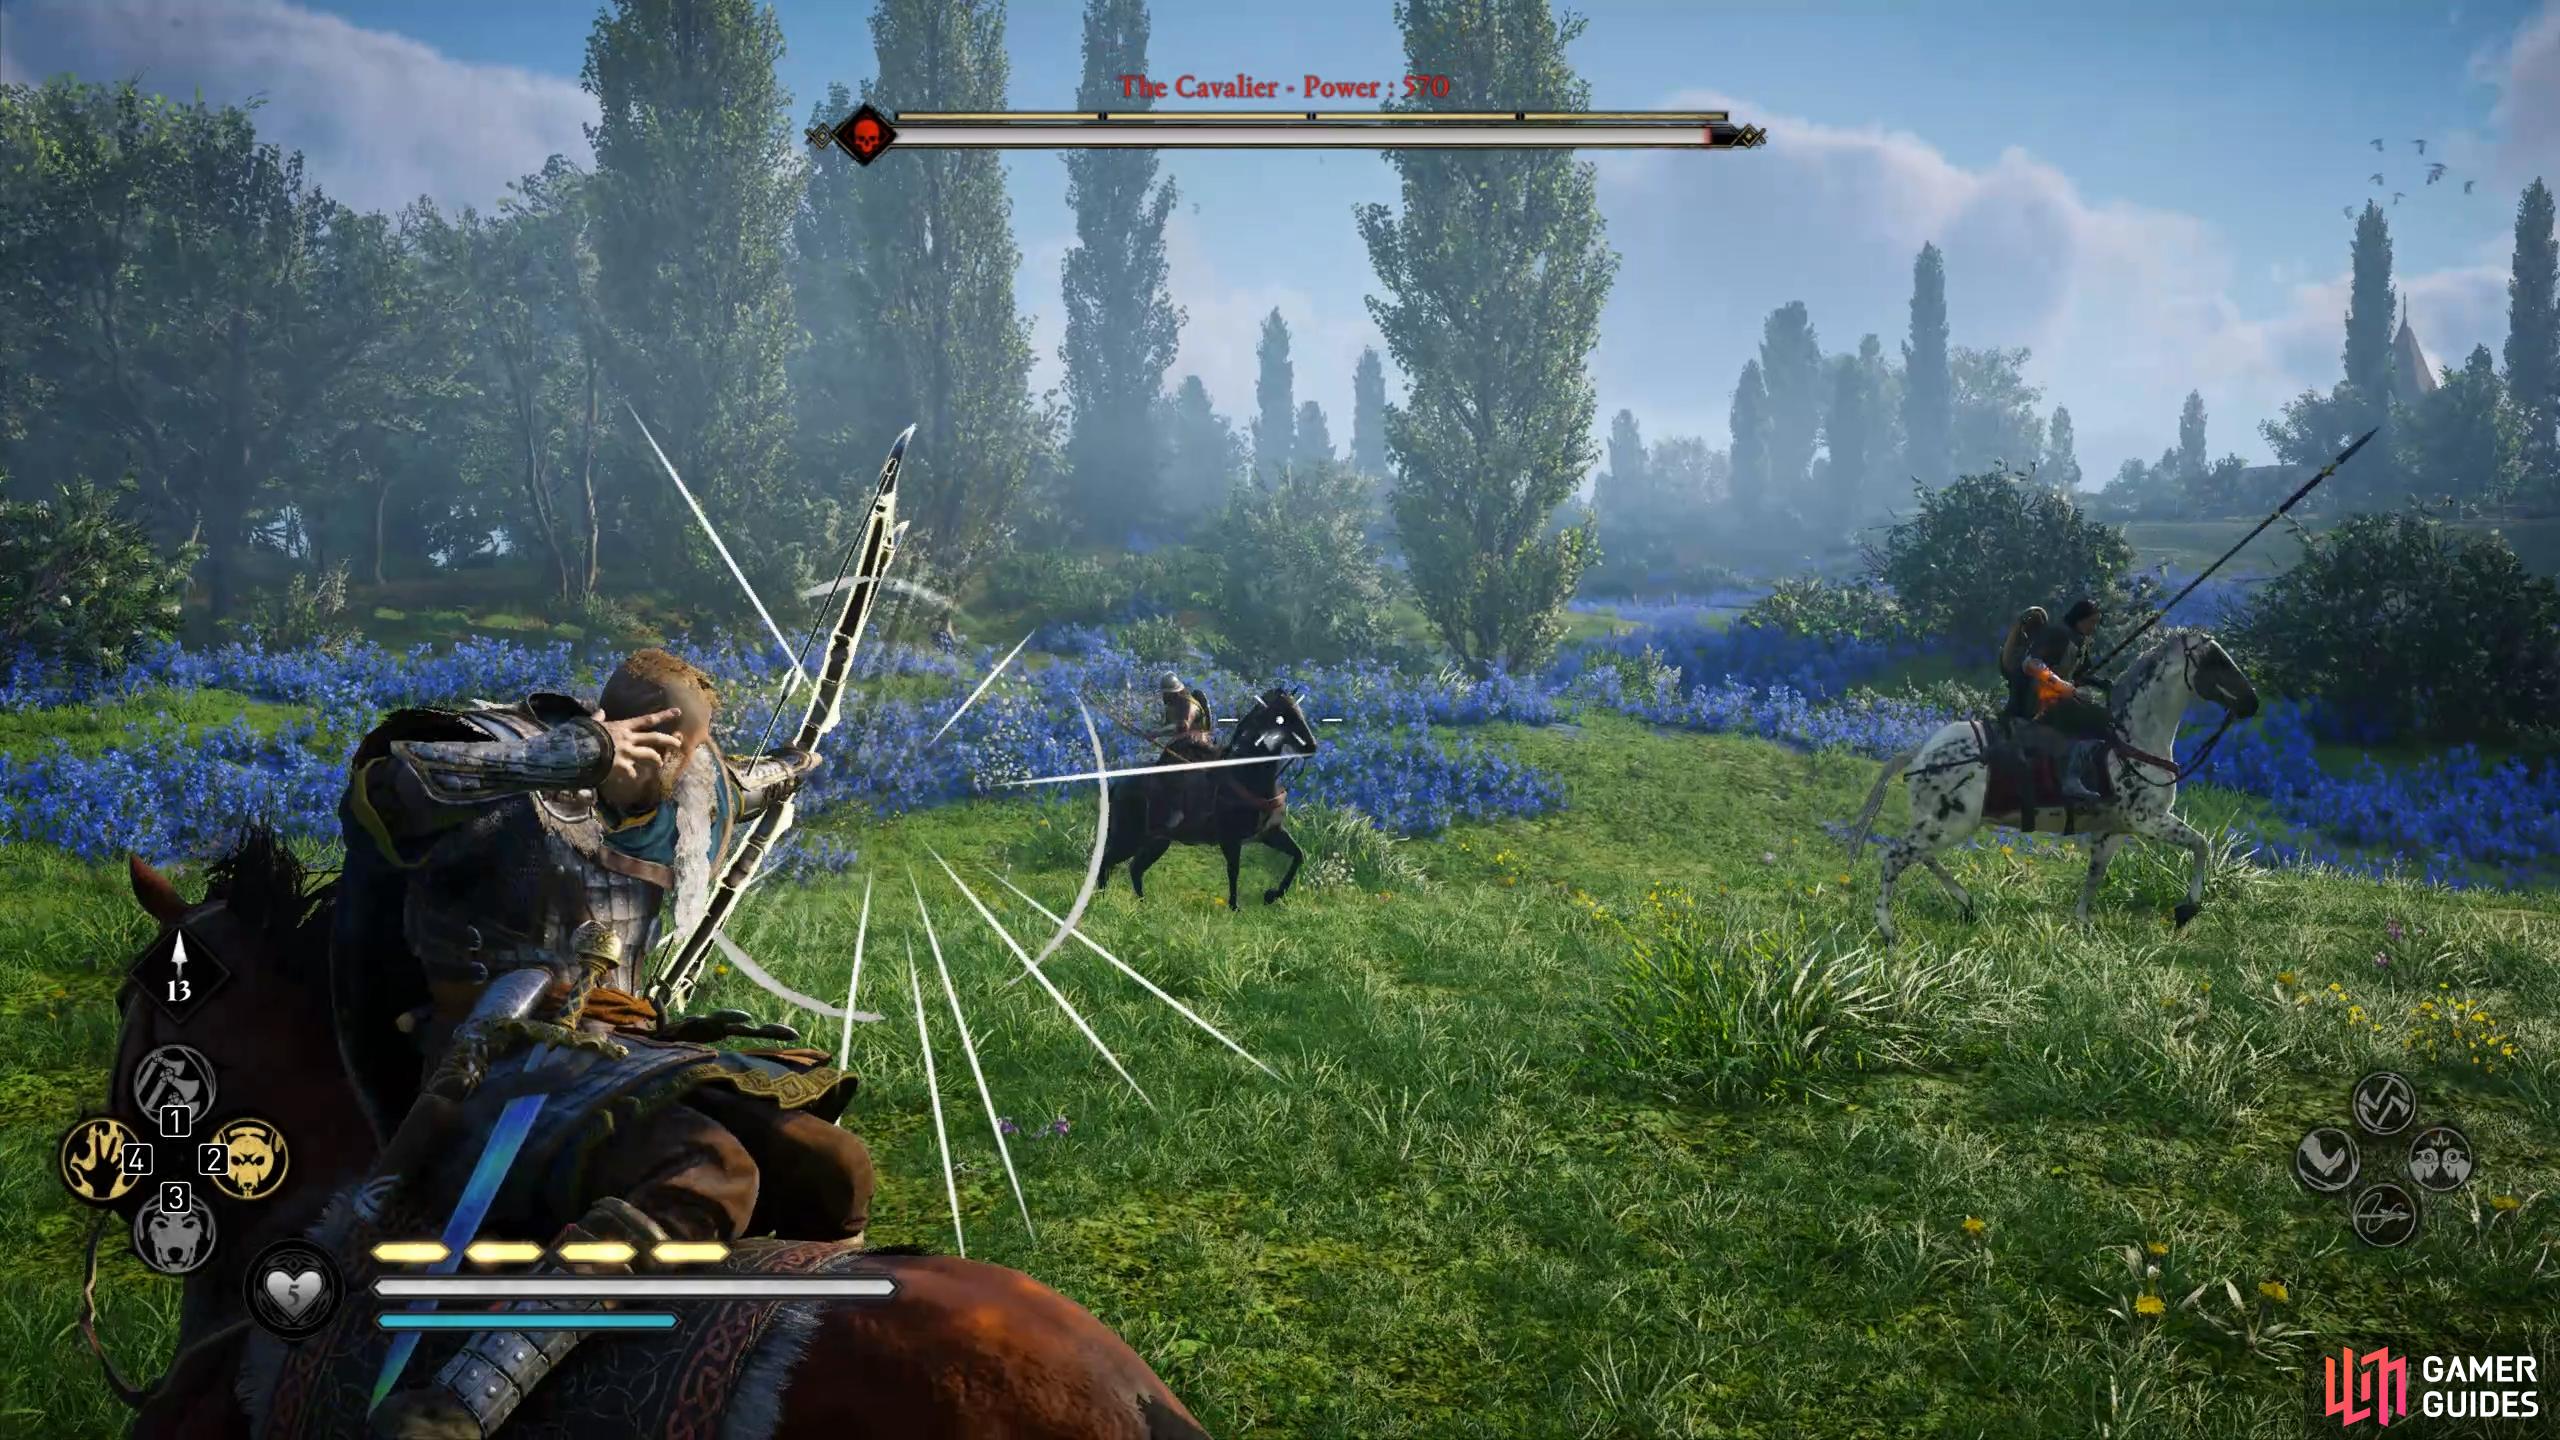 You can shoot the other mounted soldier from horseback if youre confident with your aim.